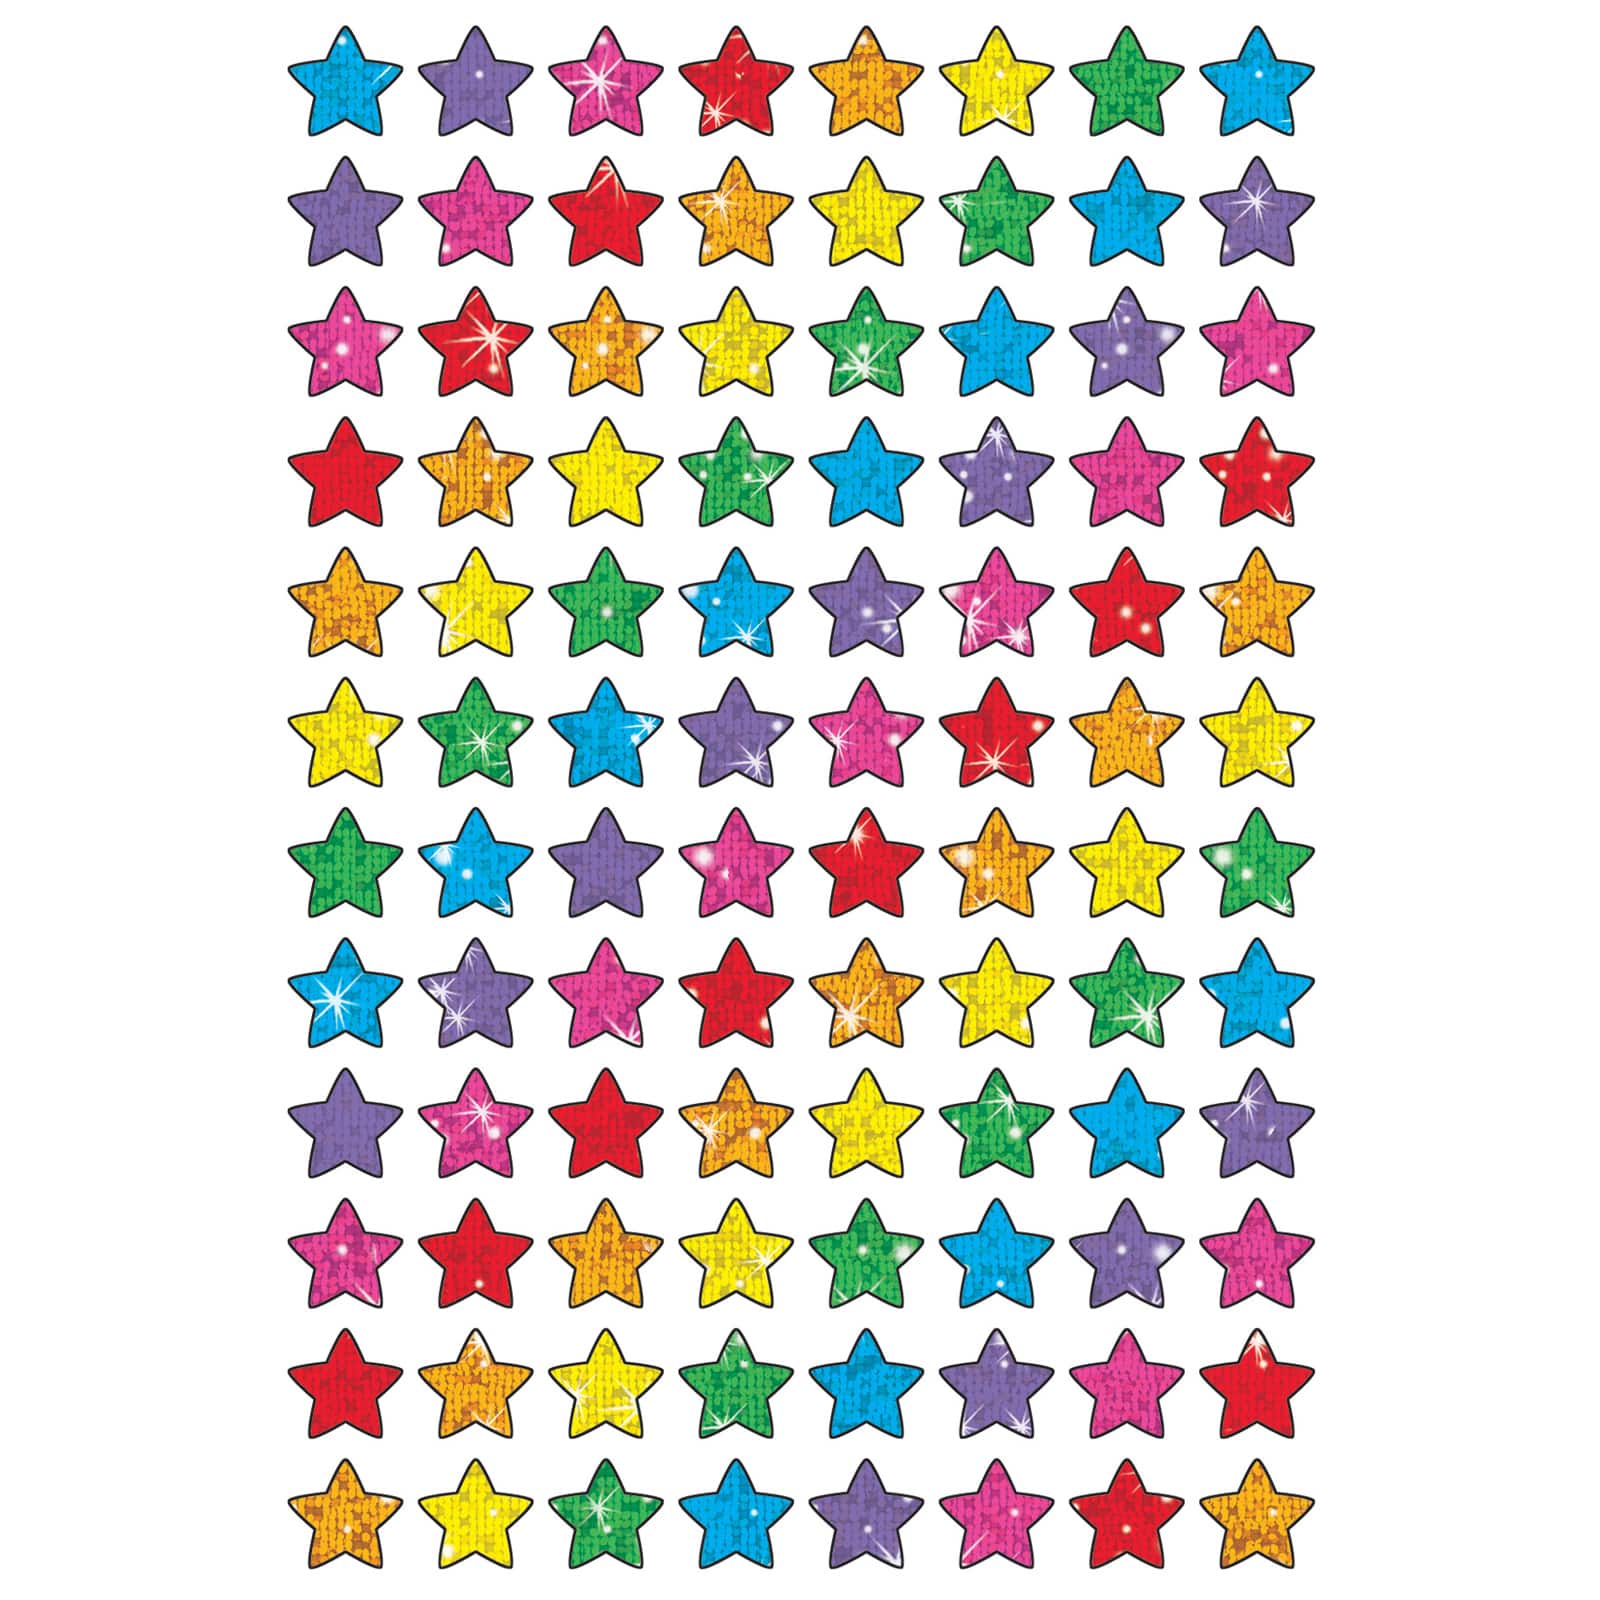 Self-adhesive Trend Gold Sparkle Stars Supershapes Stickers Sparkle Stars 